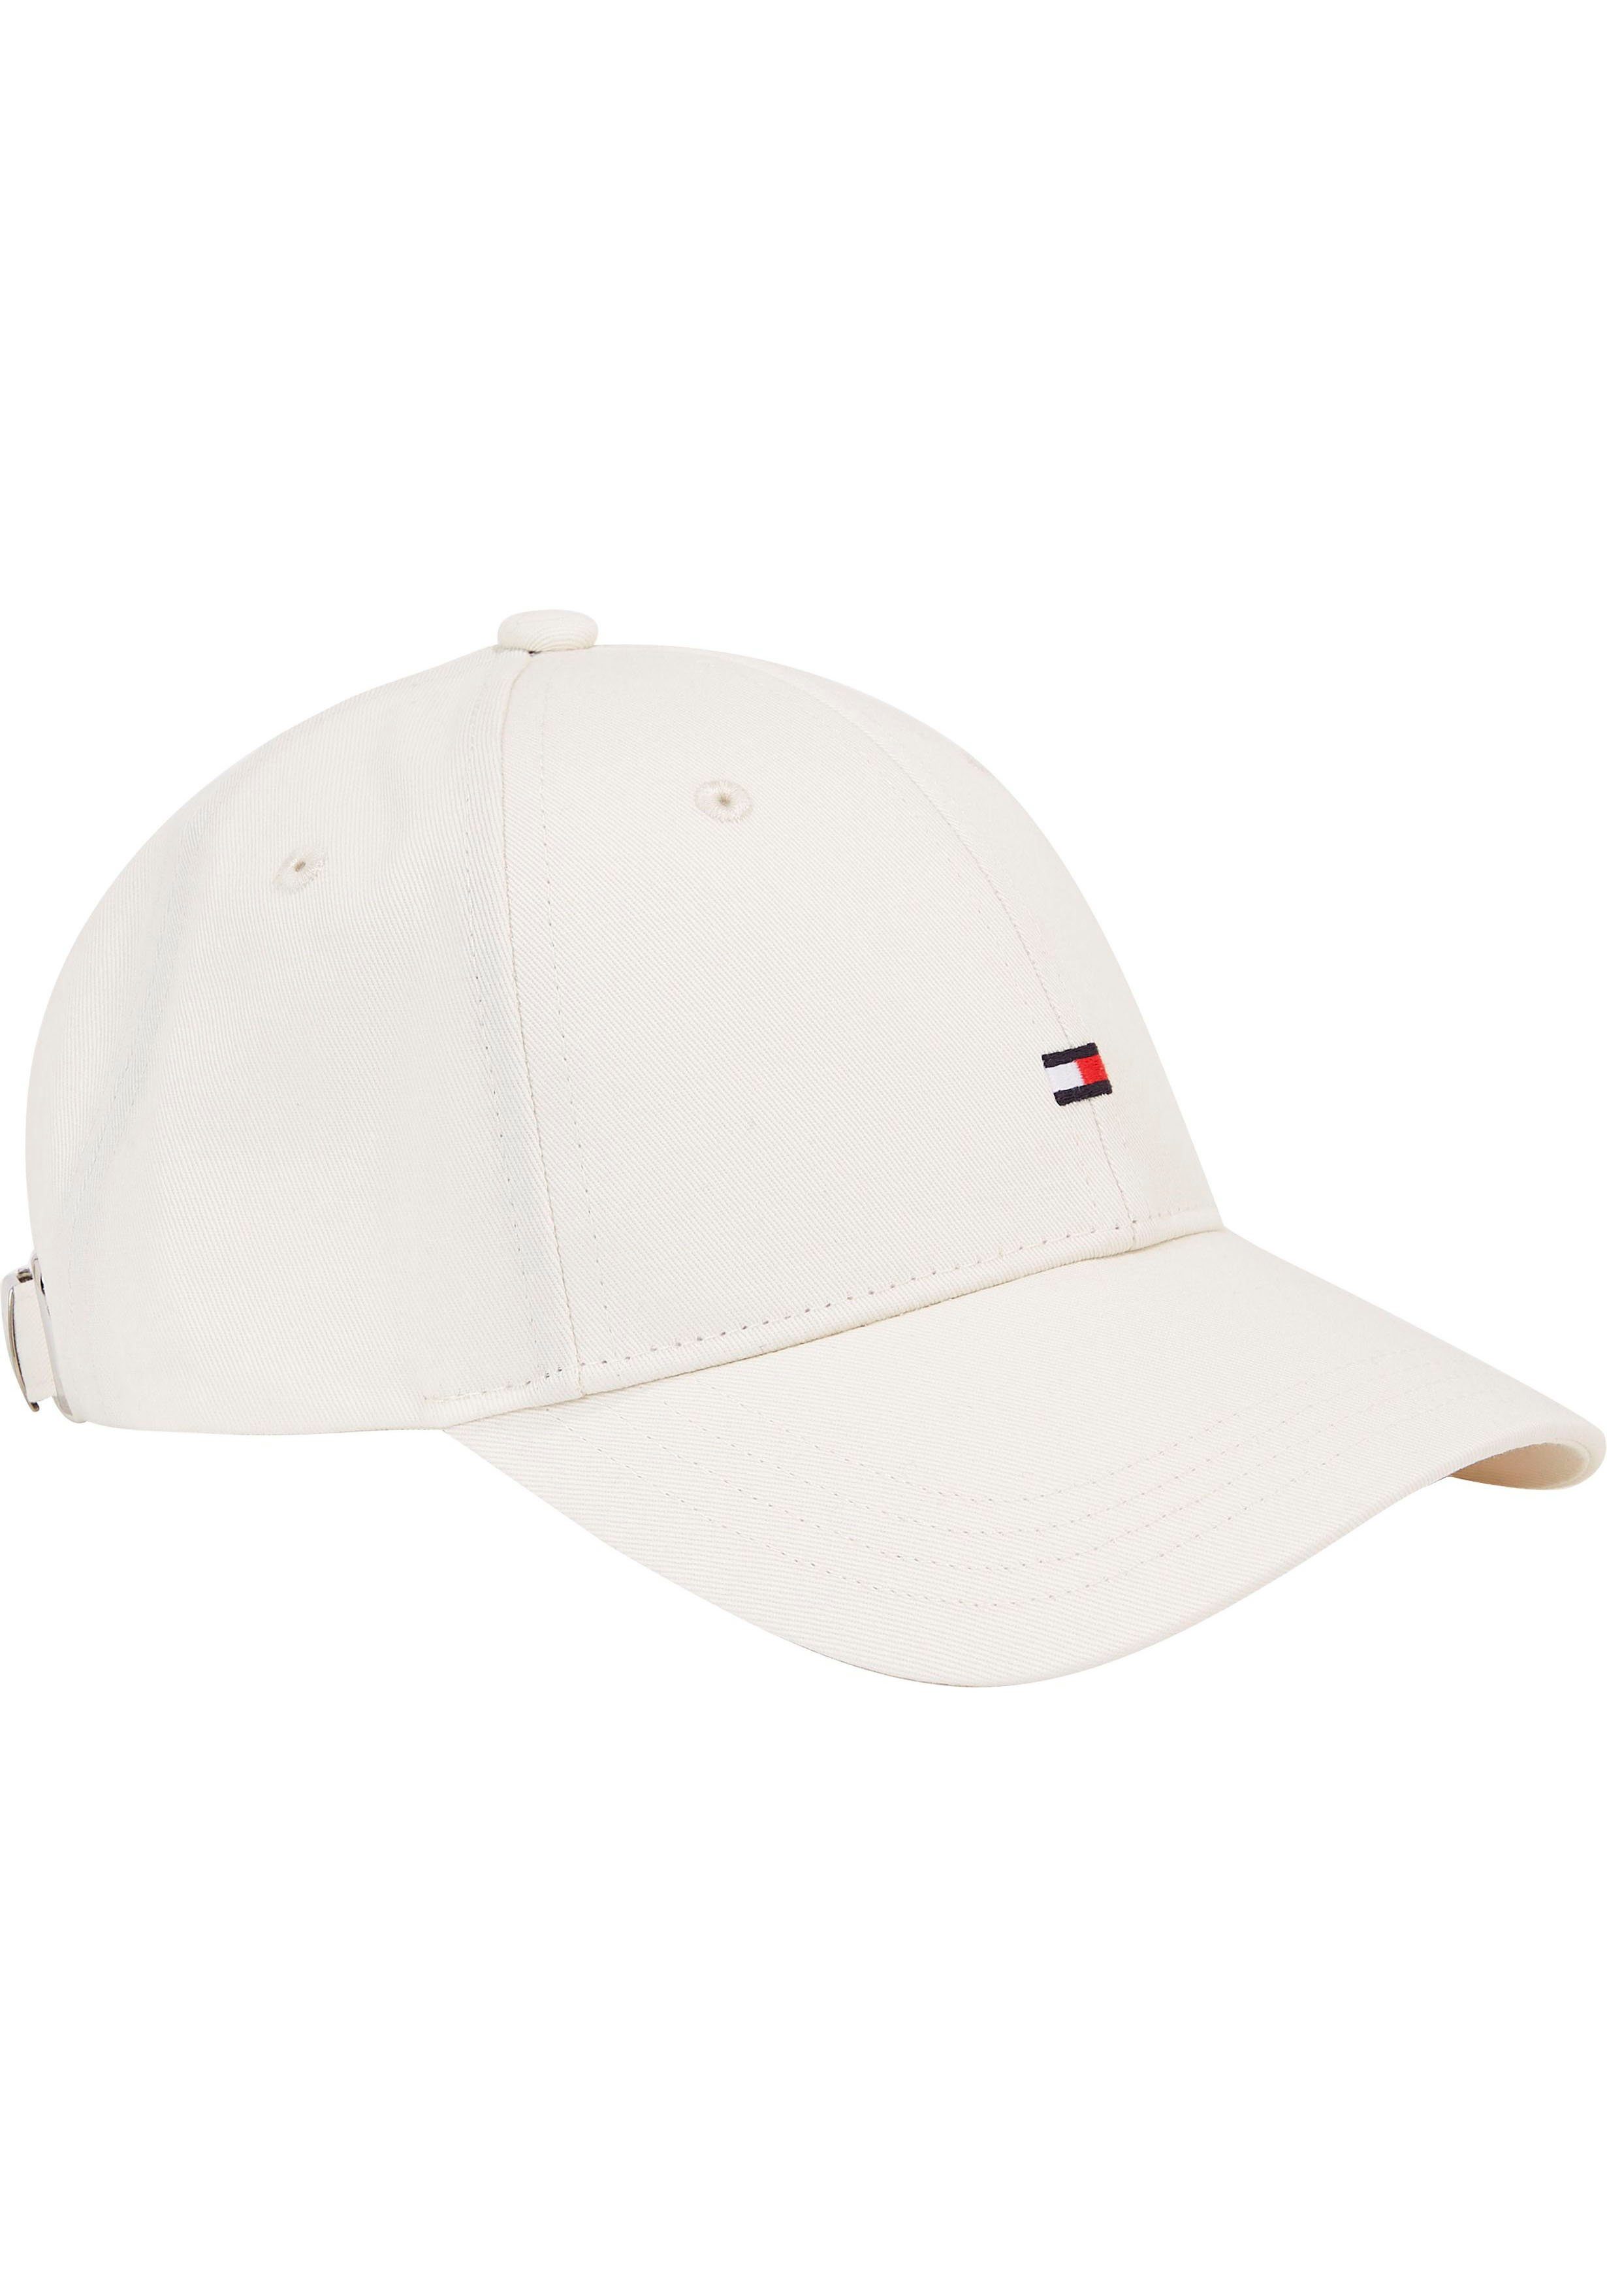 Klemmverschluss Fitted SMALL Hilfiger Tommy FLAG Calico CAP mit Cap